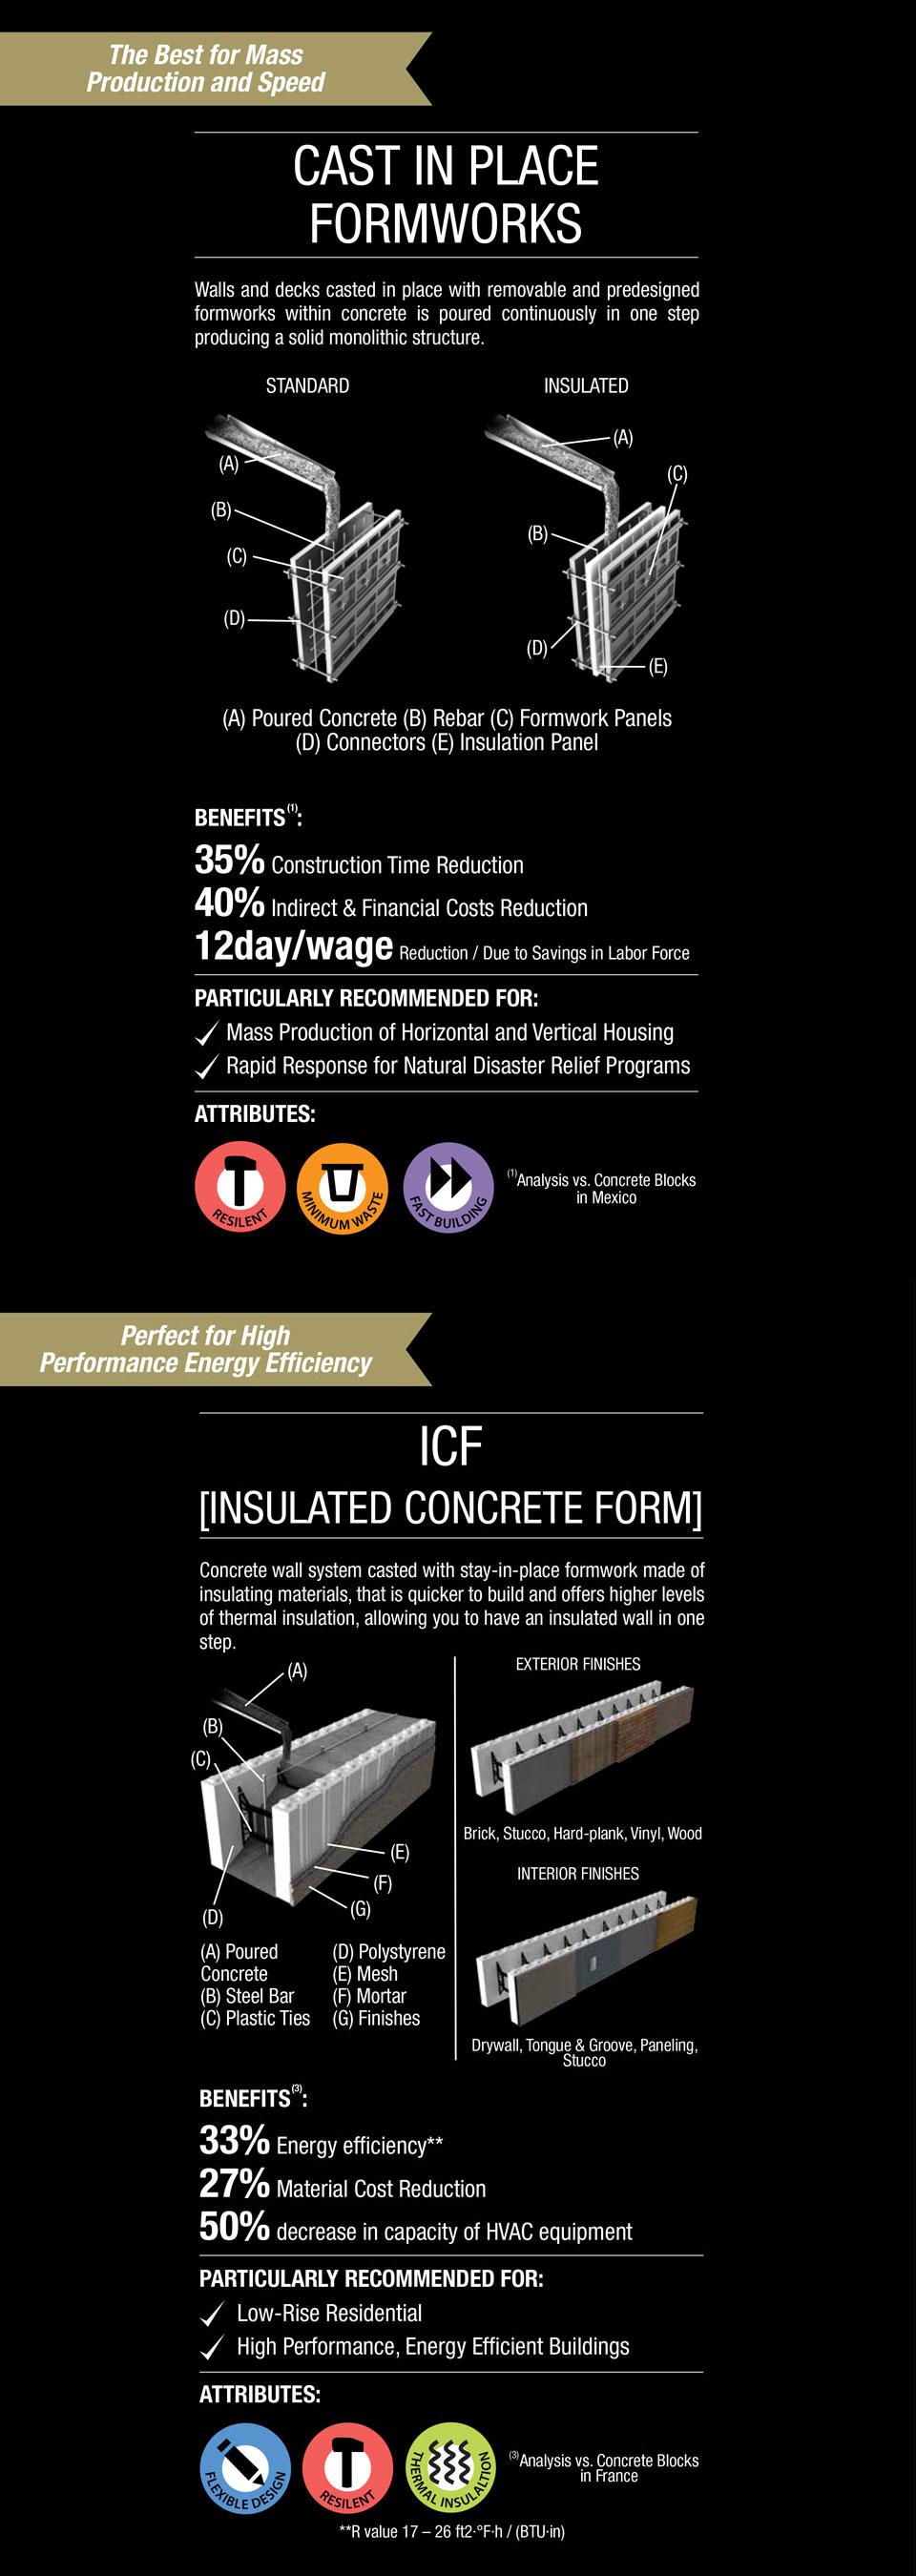 An image that describes the benefits and attributes of the cast and of the insulated concrete form.